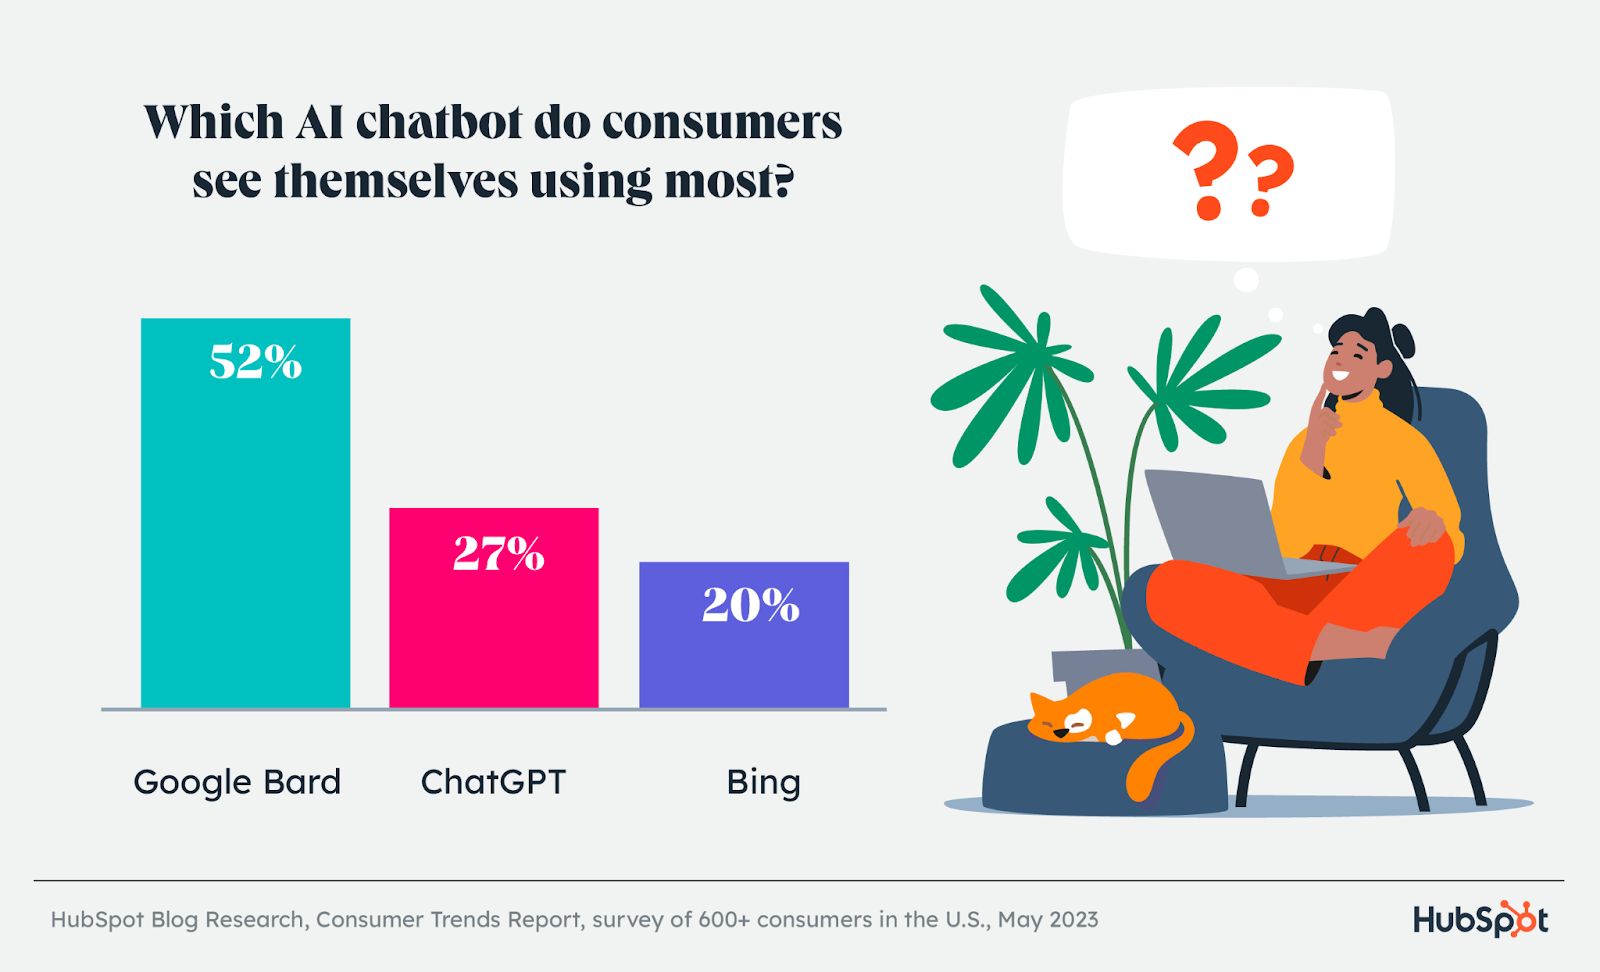 which AI chatbots do consumers prefer